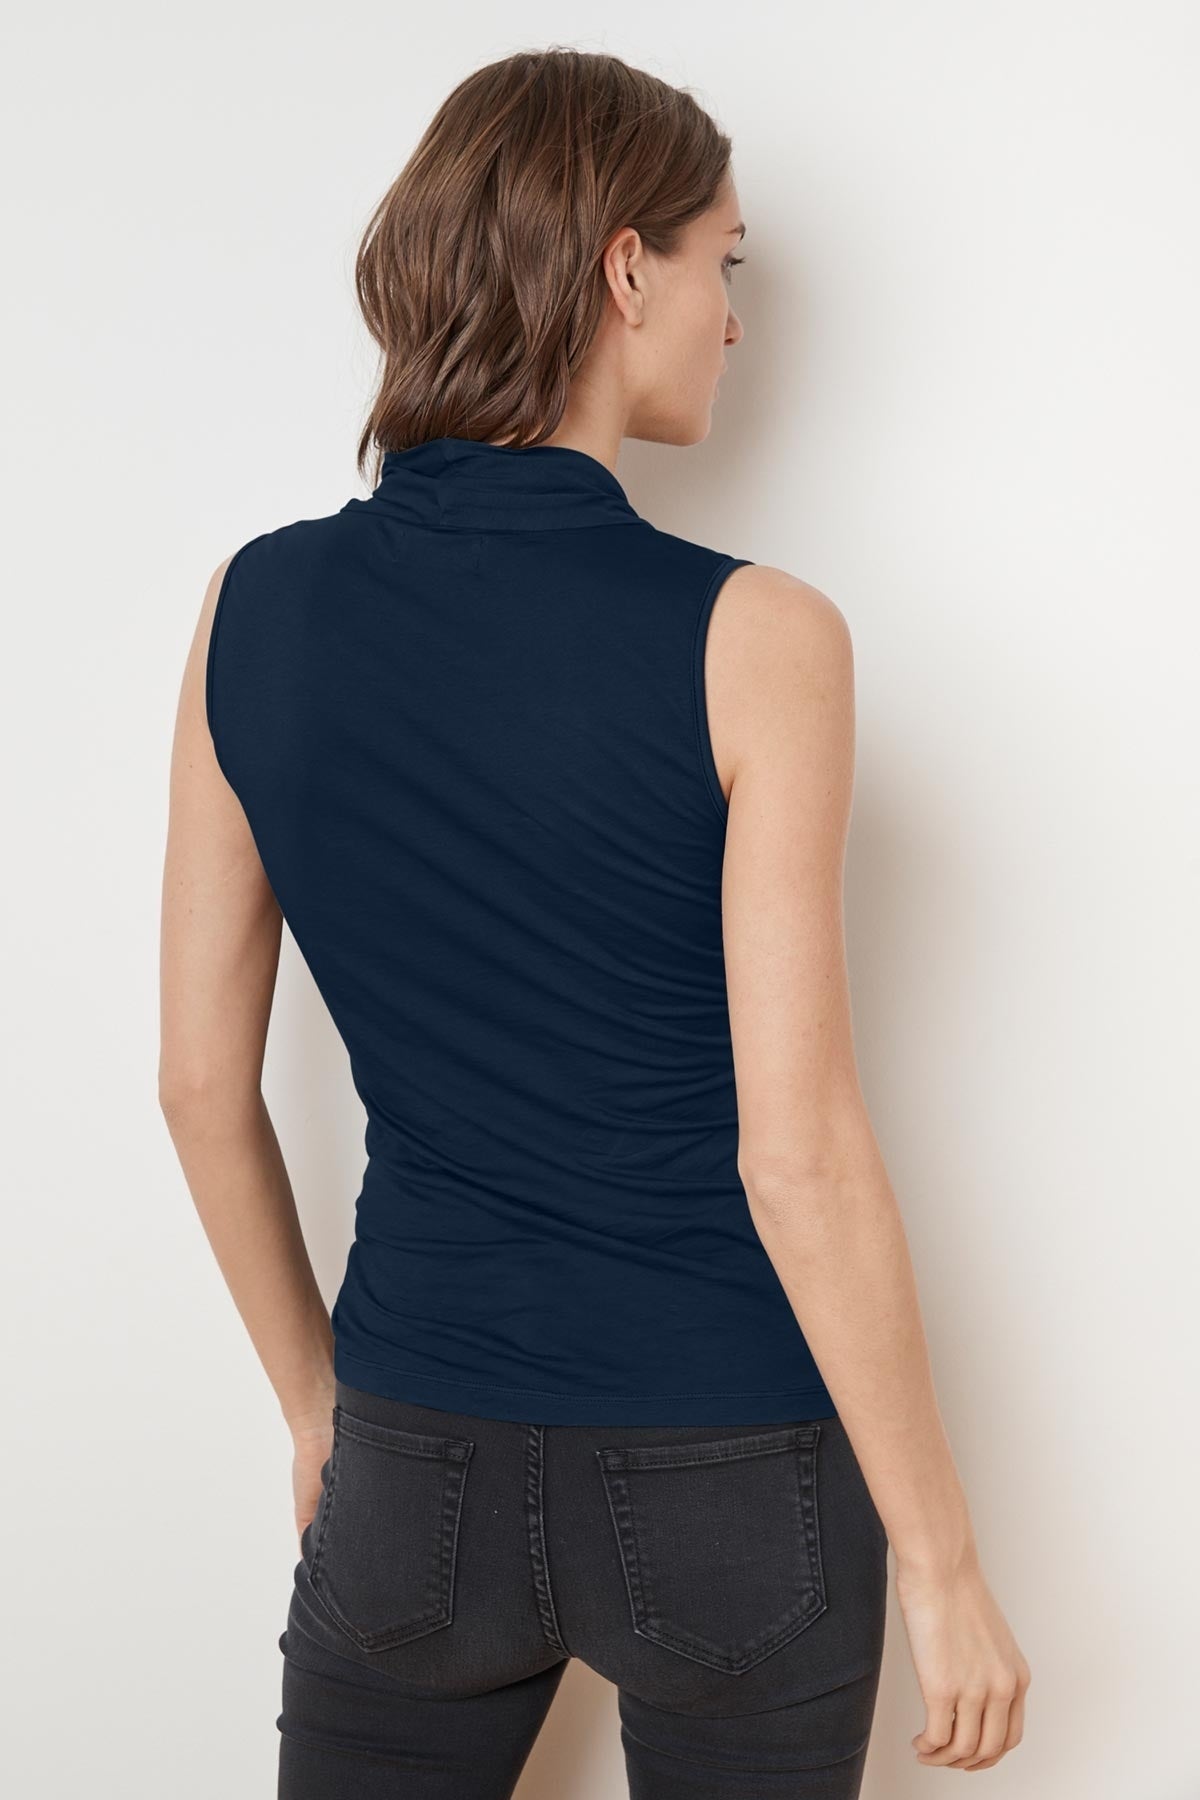   ADELISE GAUZY WHISPER FITTED WRAP TANK 